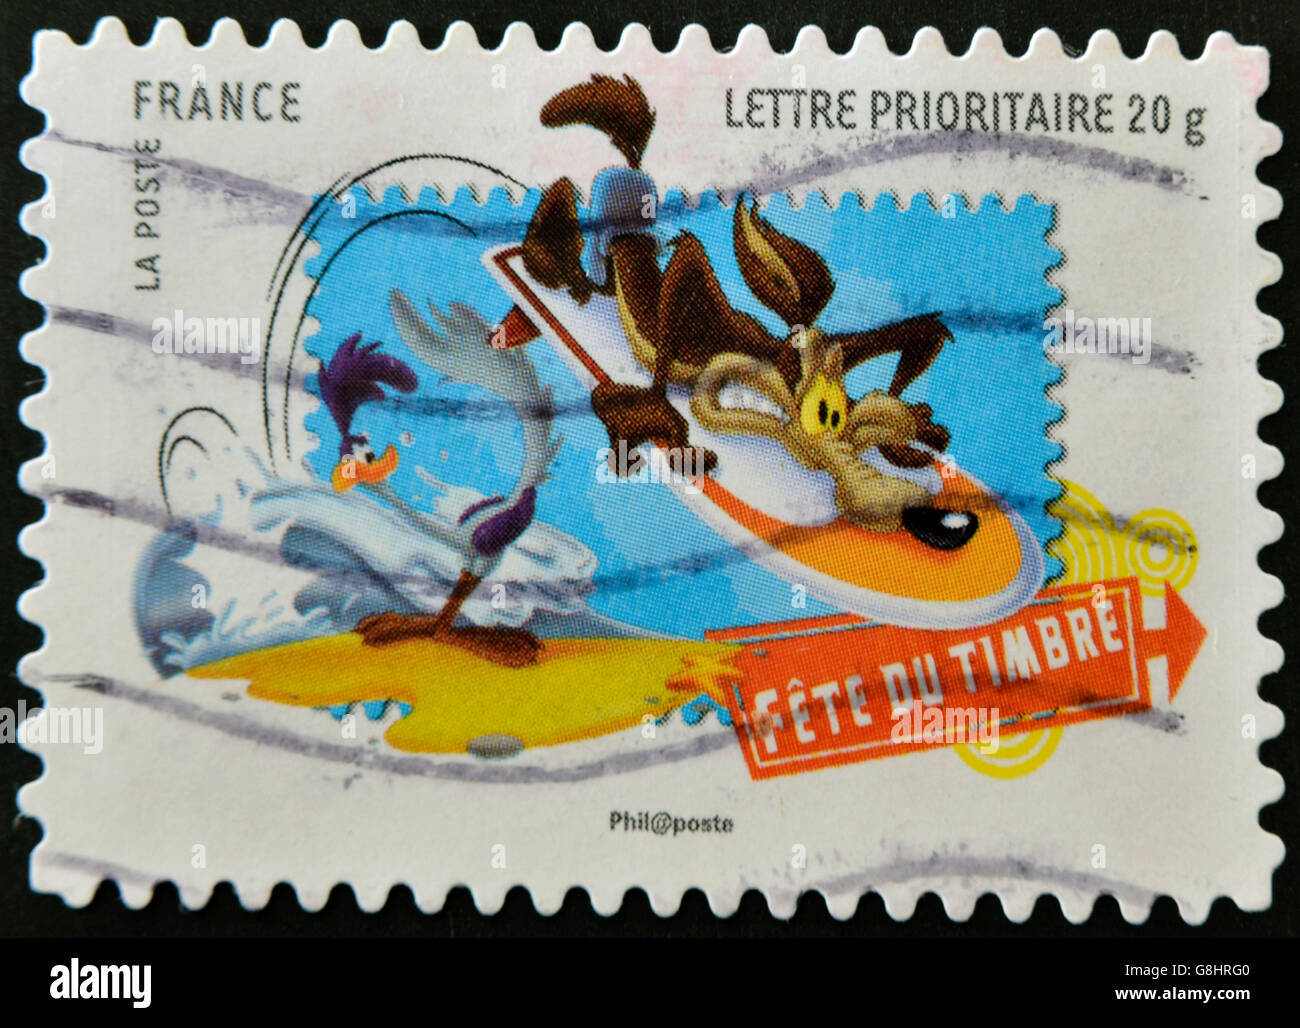 FRANCE - CIRCA 2009: A stamp printed in France shows Wile E. Coyote and the Road Runner, Looney Tunes, circa 2009 Stock Photo